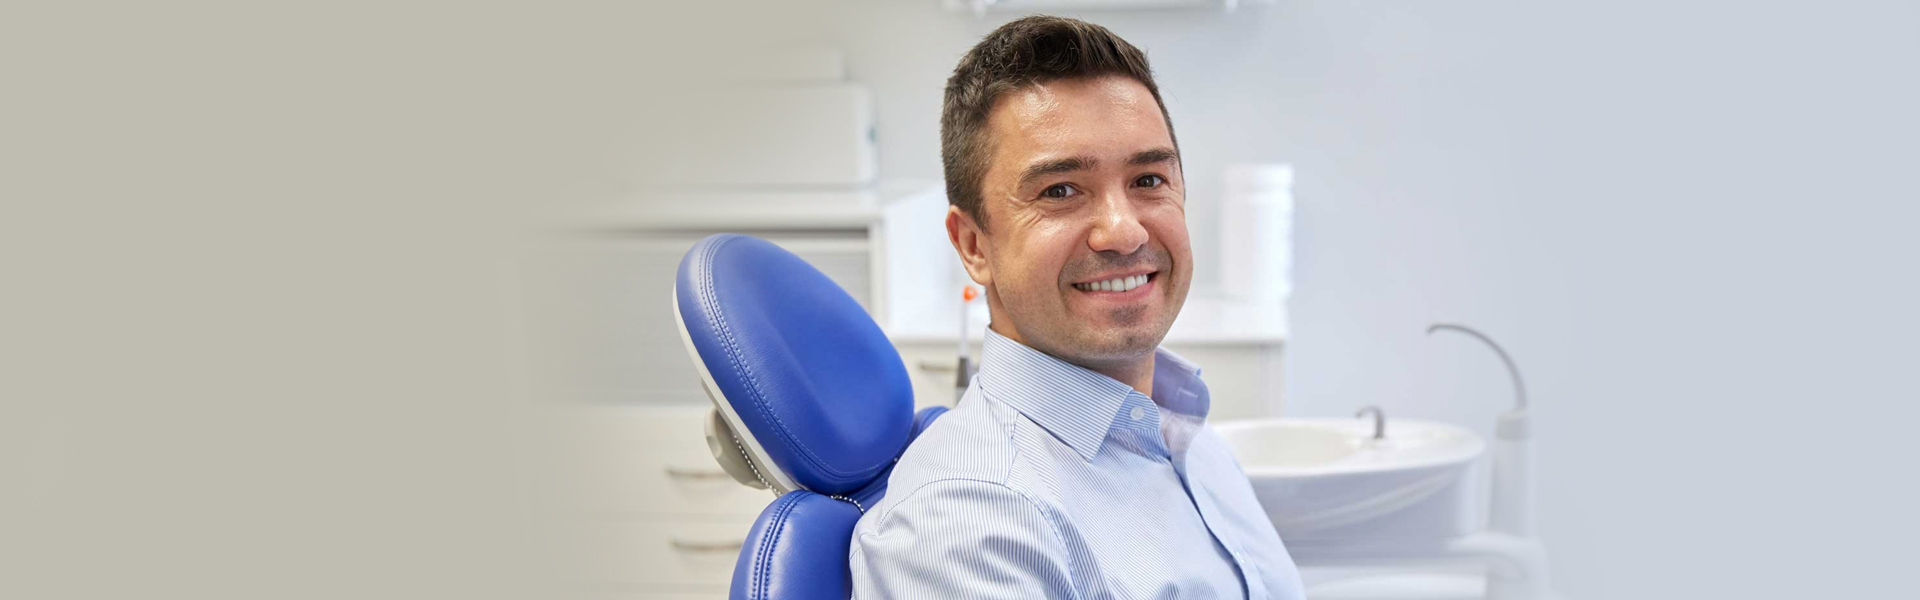 7 Reasons to Visit Your Dentist Regularly!